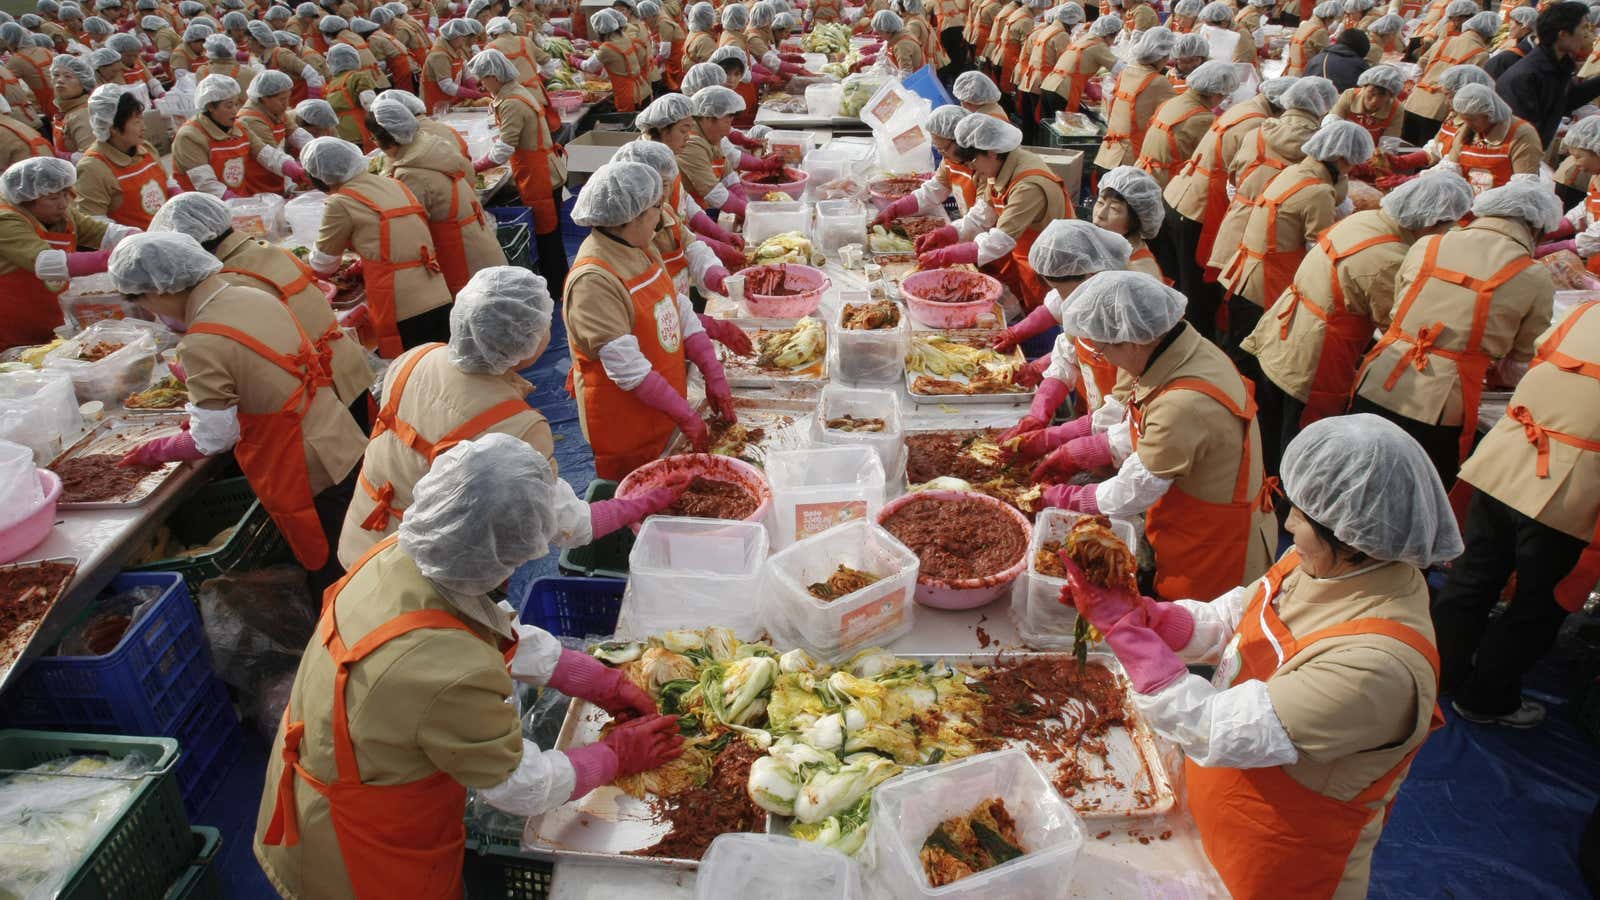 We’re not saying Korea isn’t still huddling up to churn out some serious kimchi.